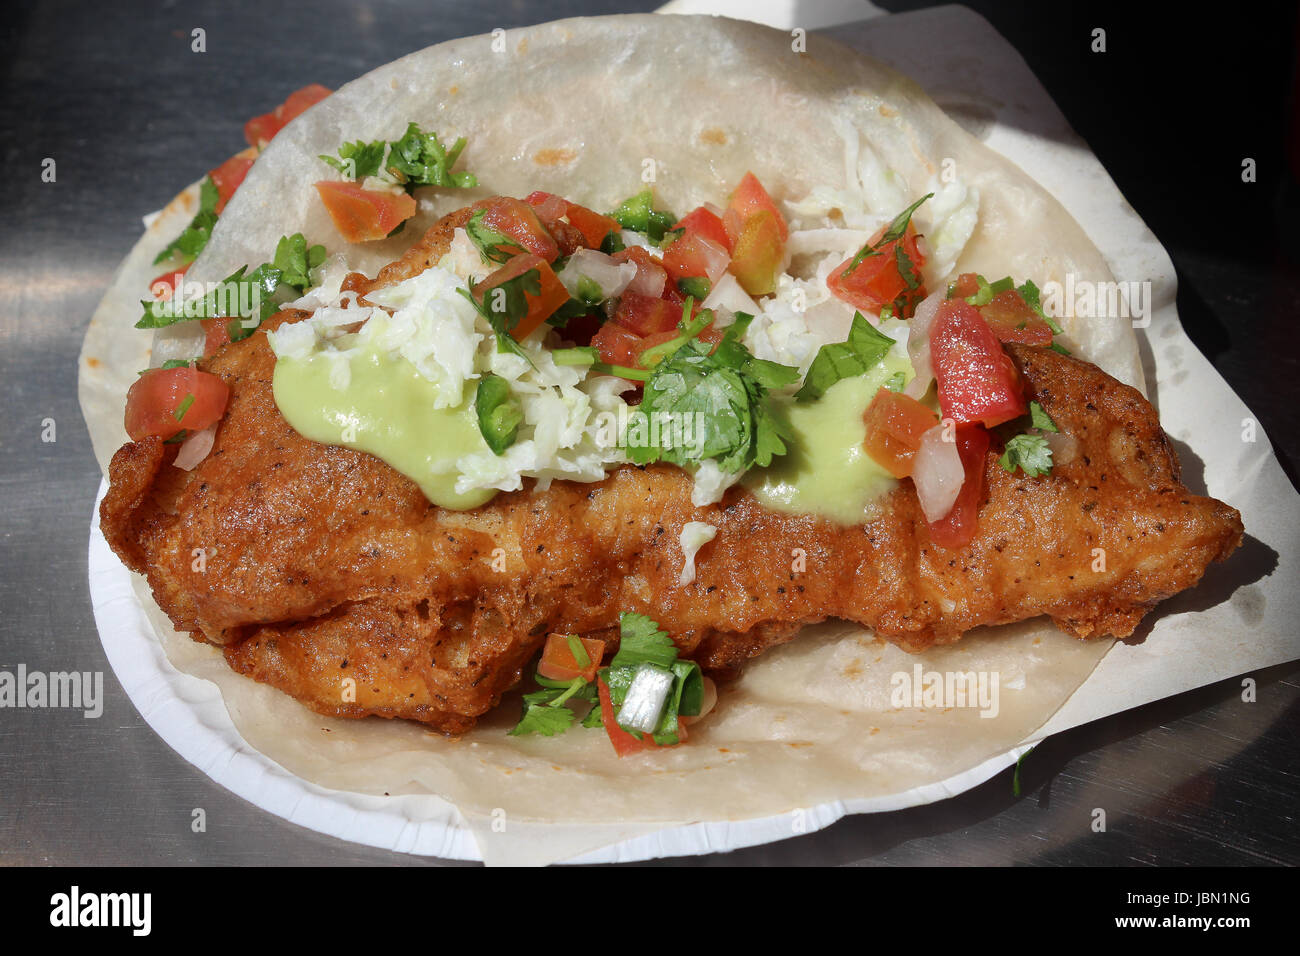 Tasty deep-fried fish taco with salsa and crema on flour tortilla, from Mexican street vendor for lunch Stock Photo